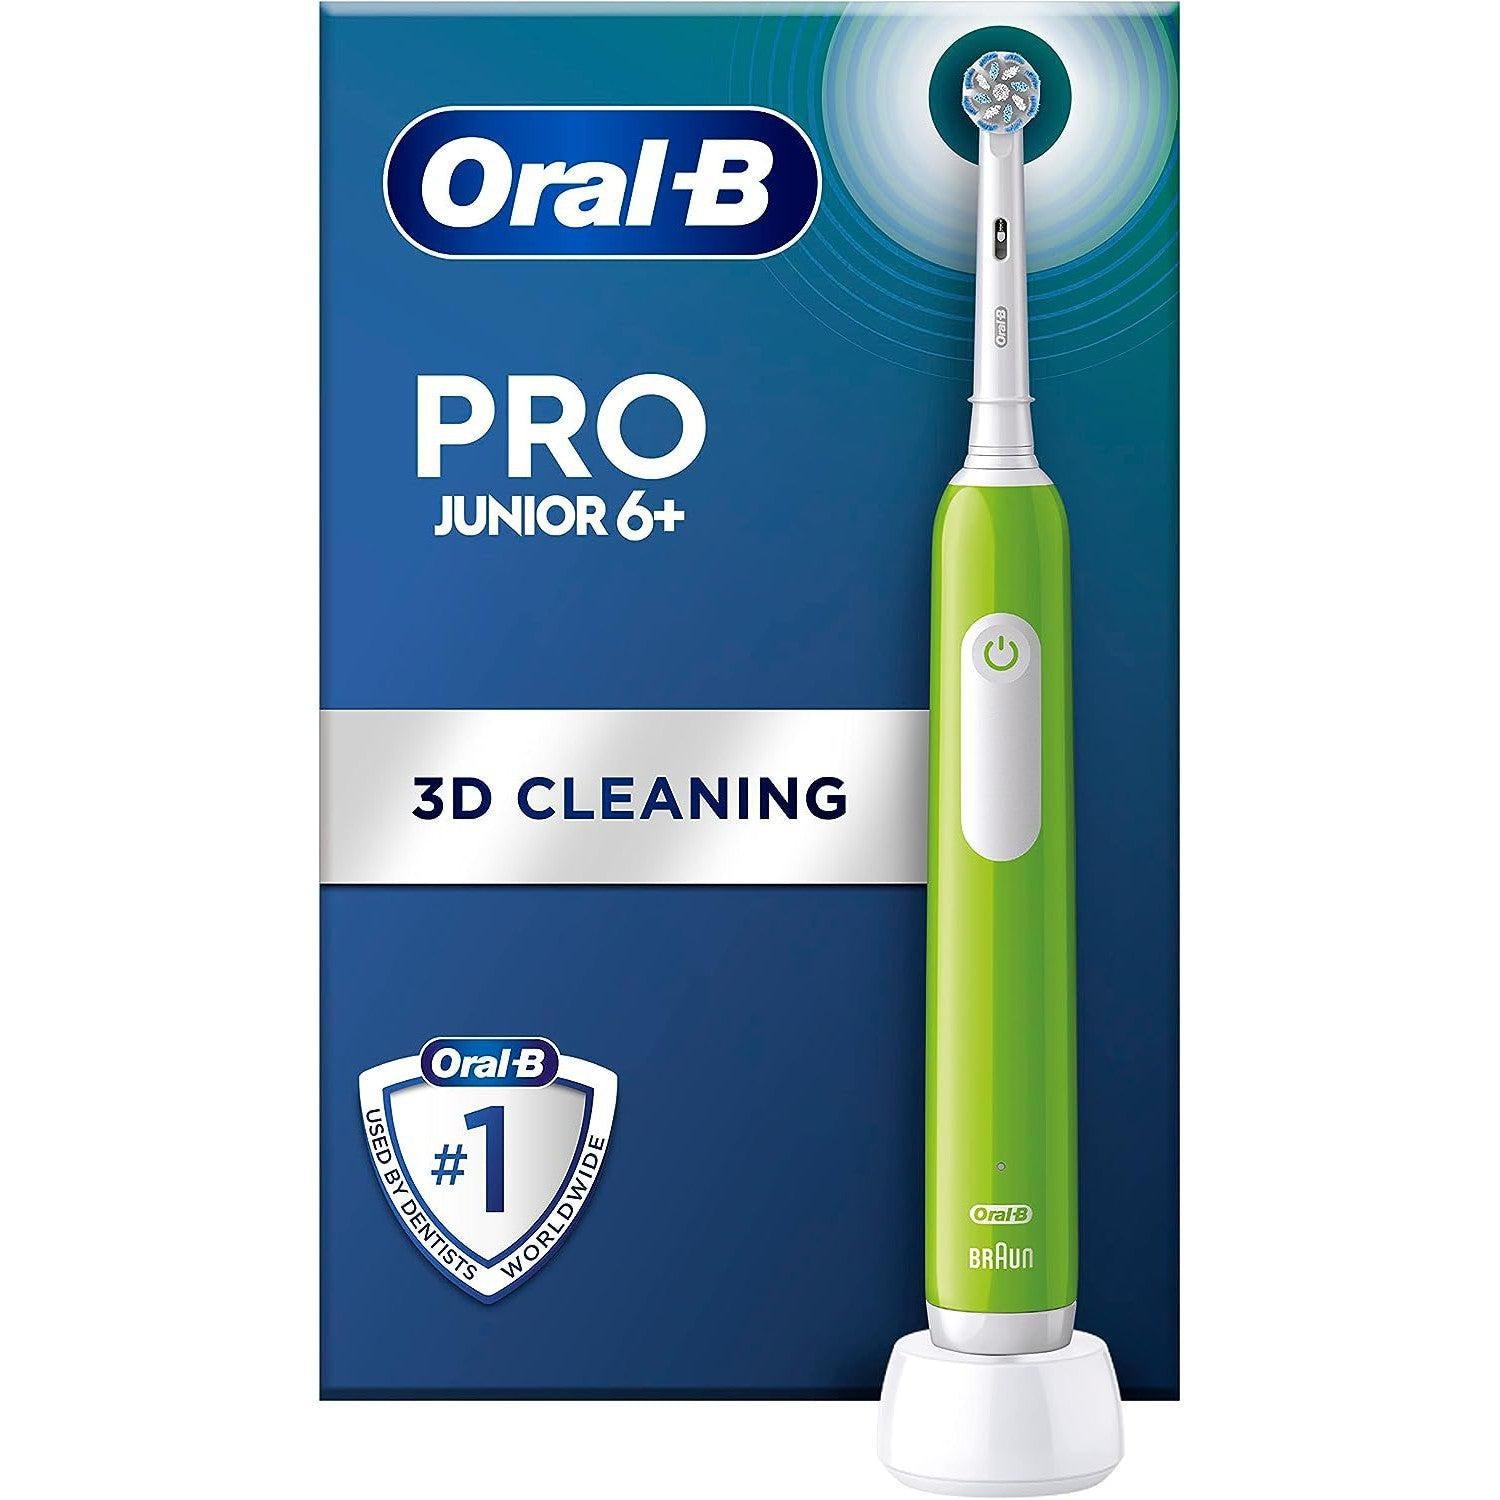 Oral-B Pro Junior Kids Electric Toothbrush, Sensitive Mode, For Ages 6+, Green